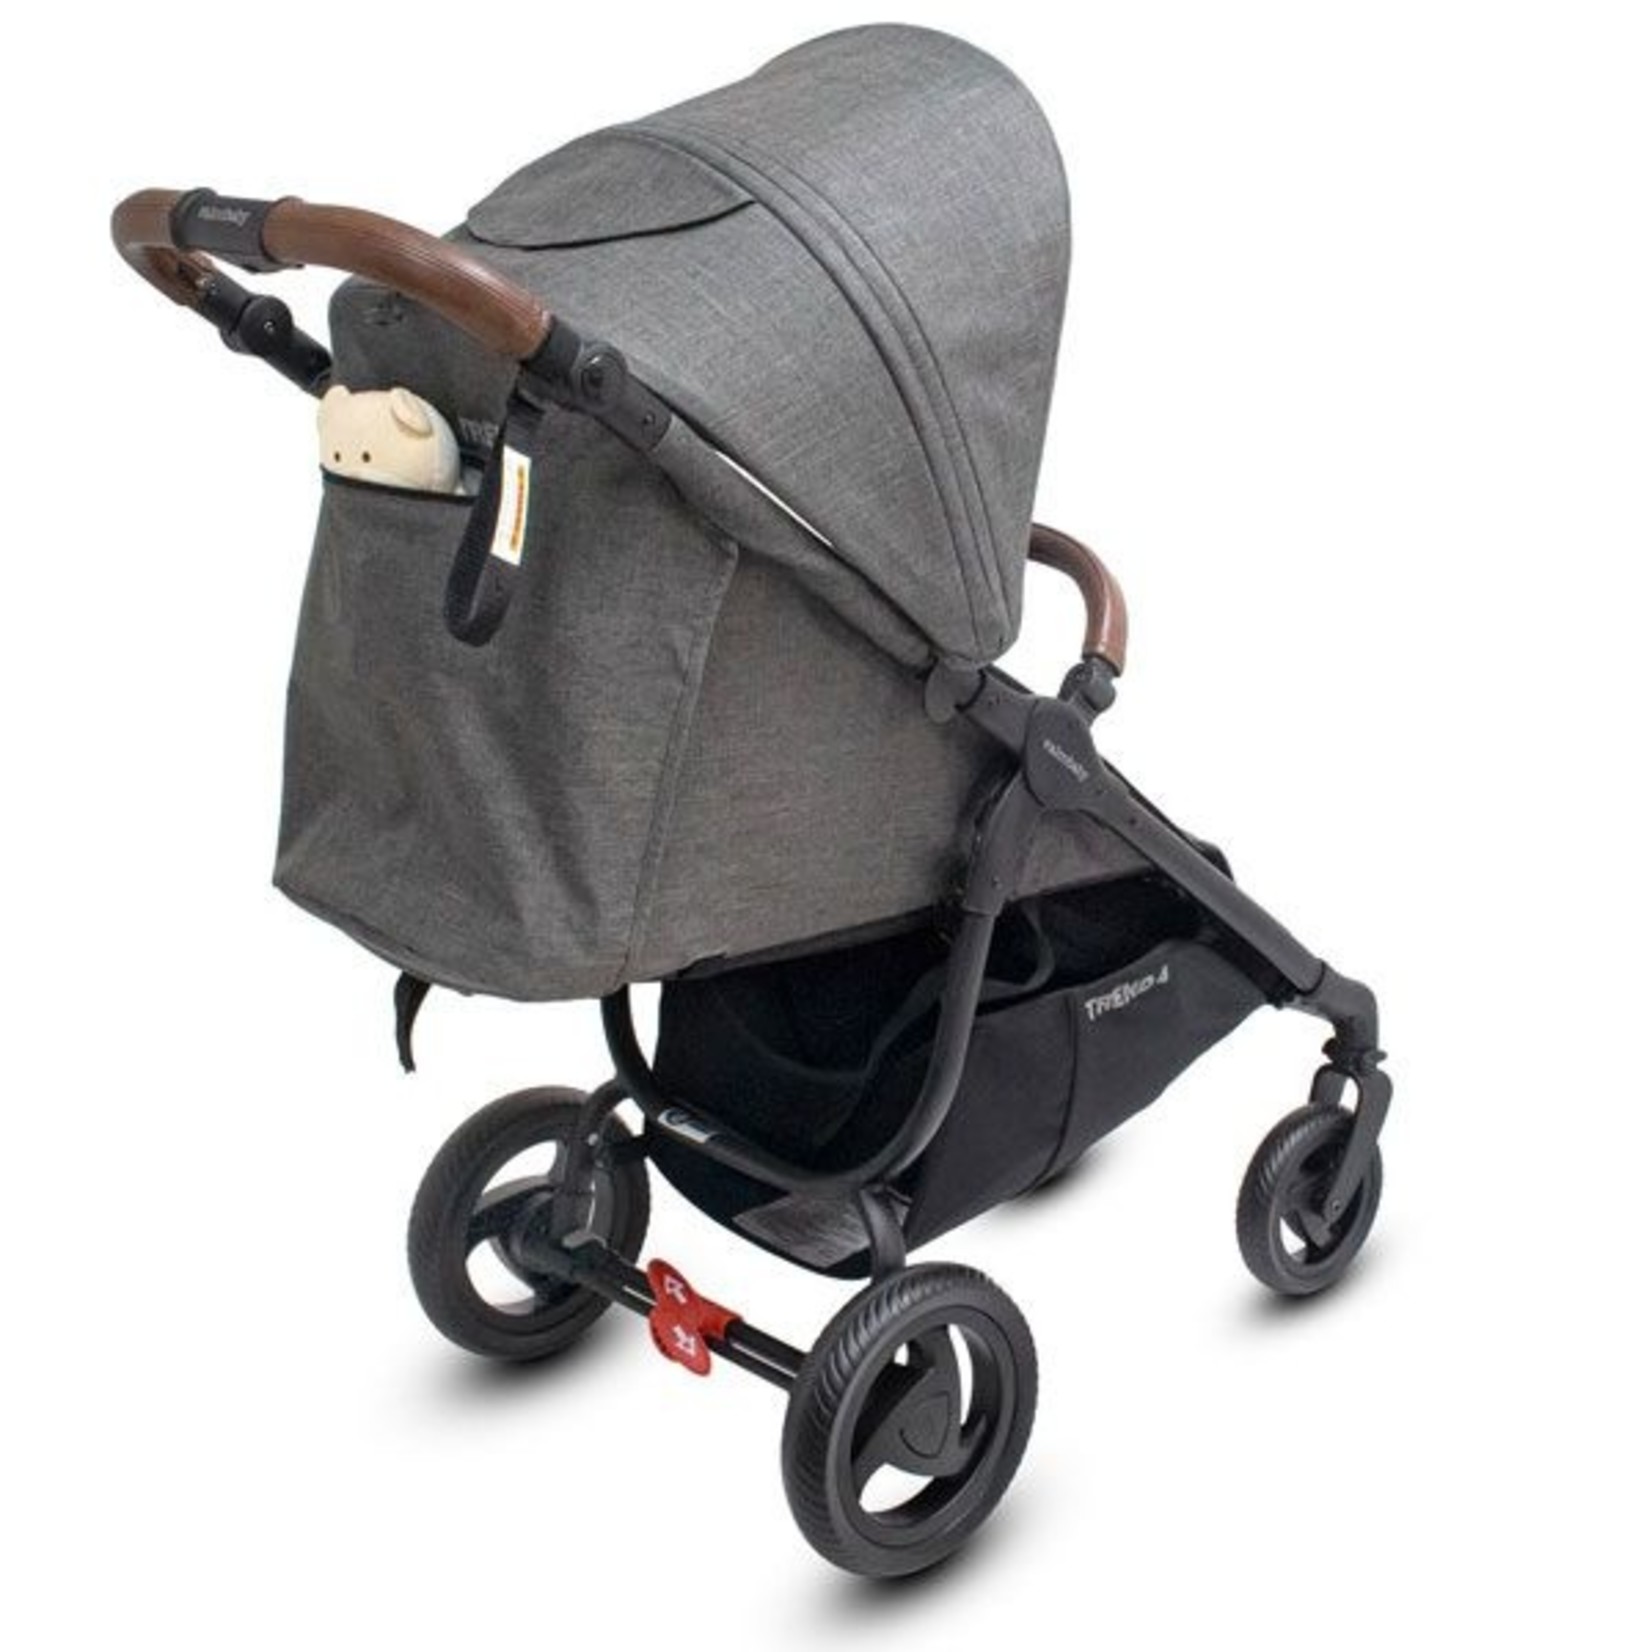 Valco Baby Trend 4 Charcoal